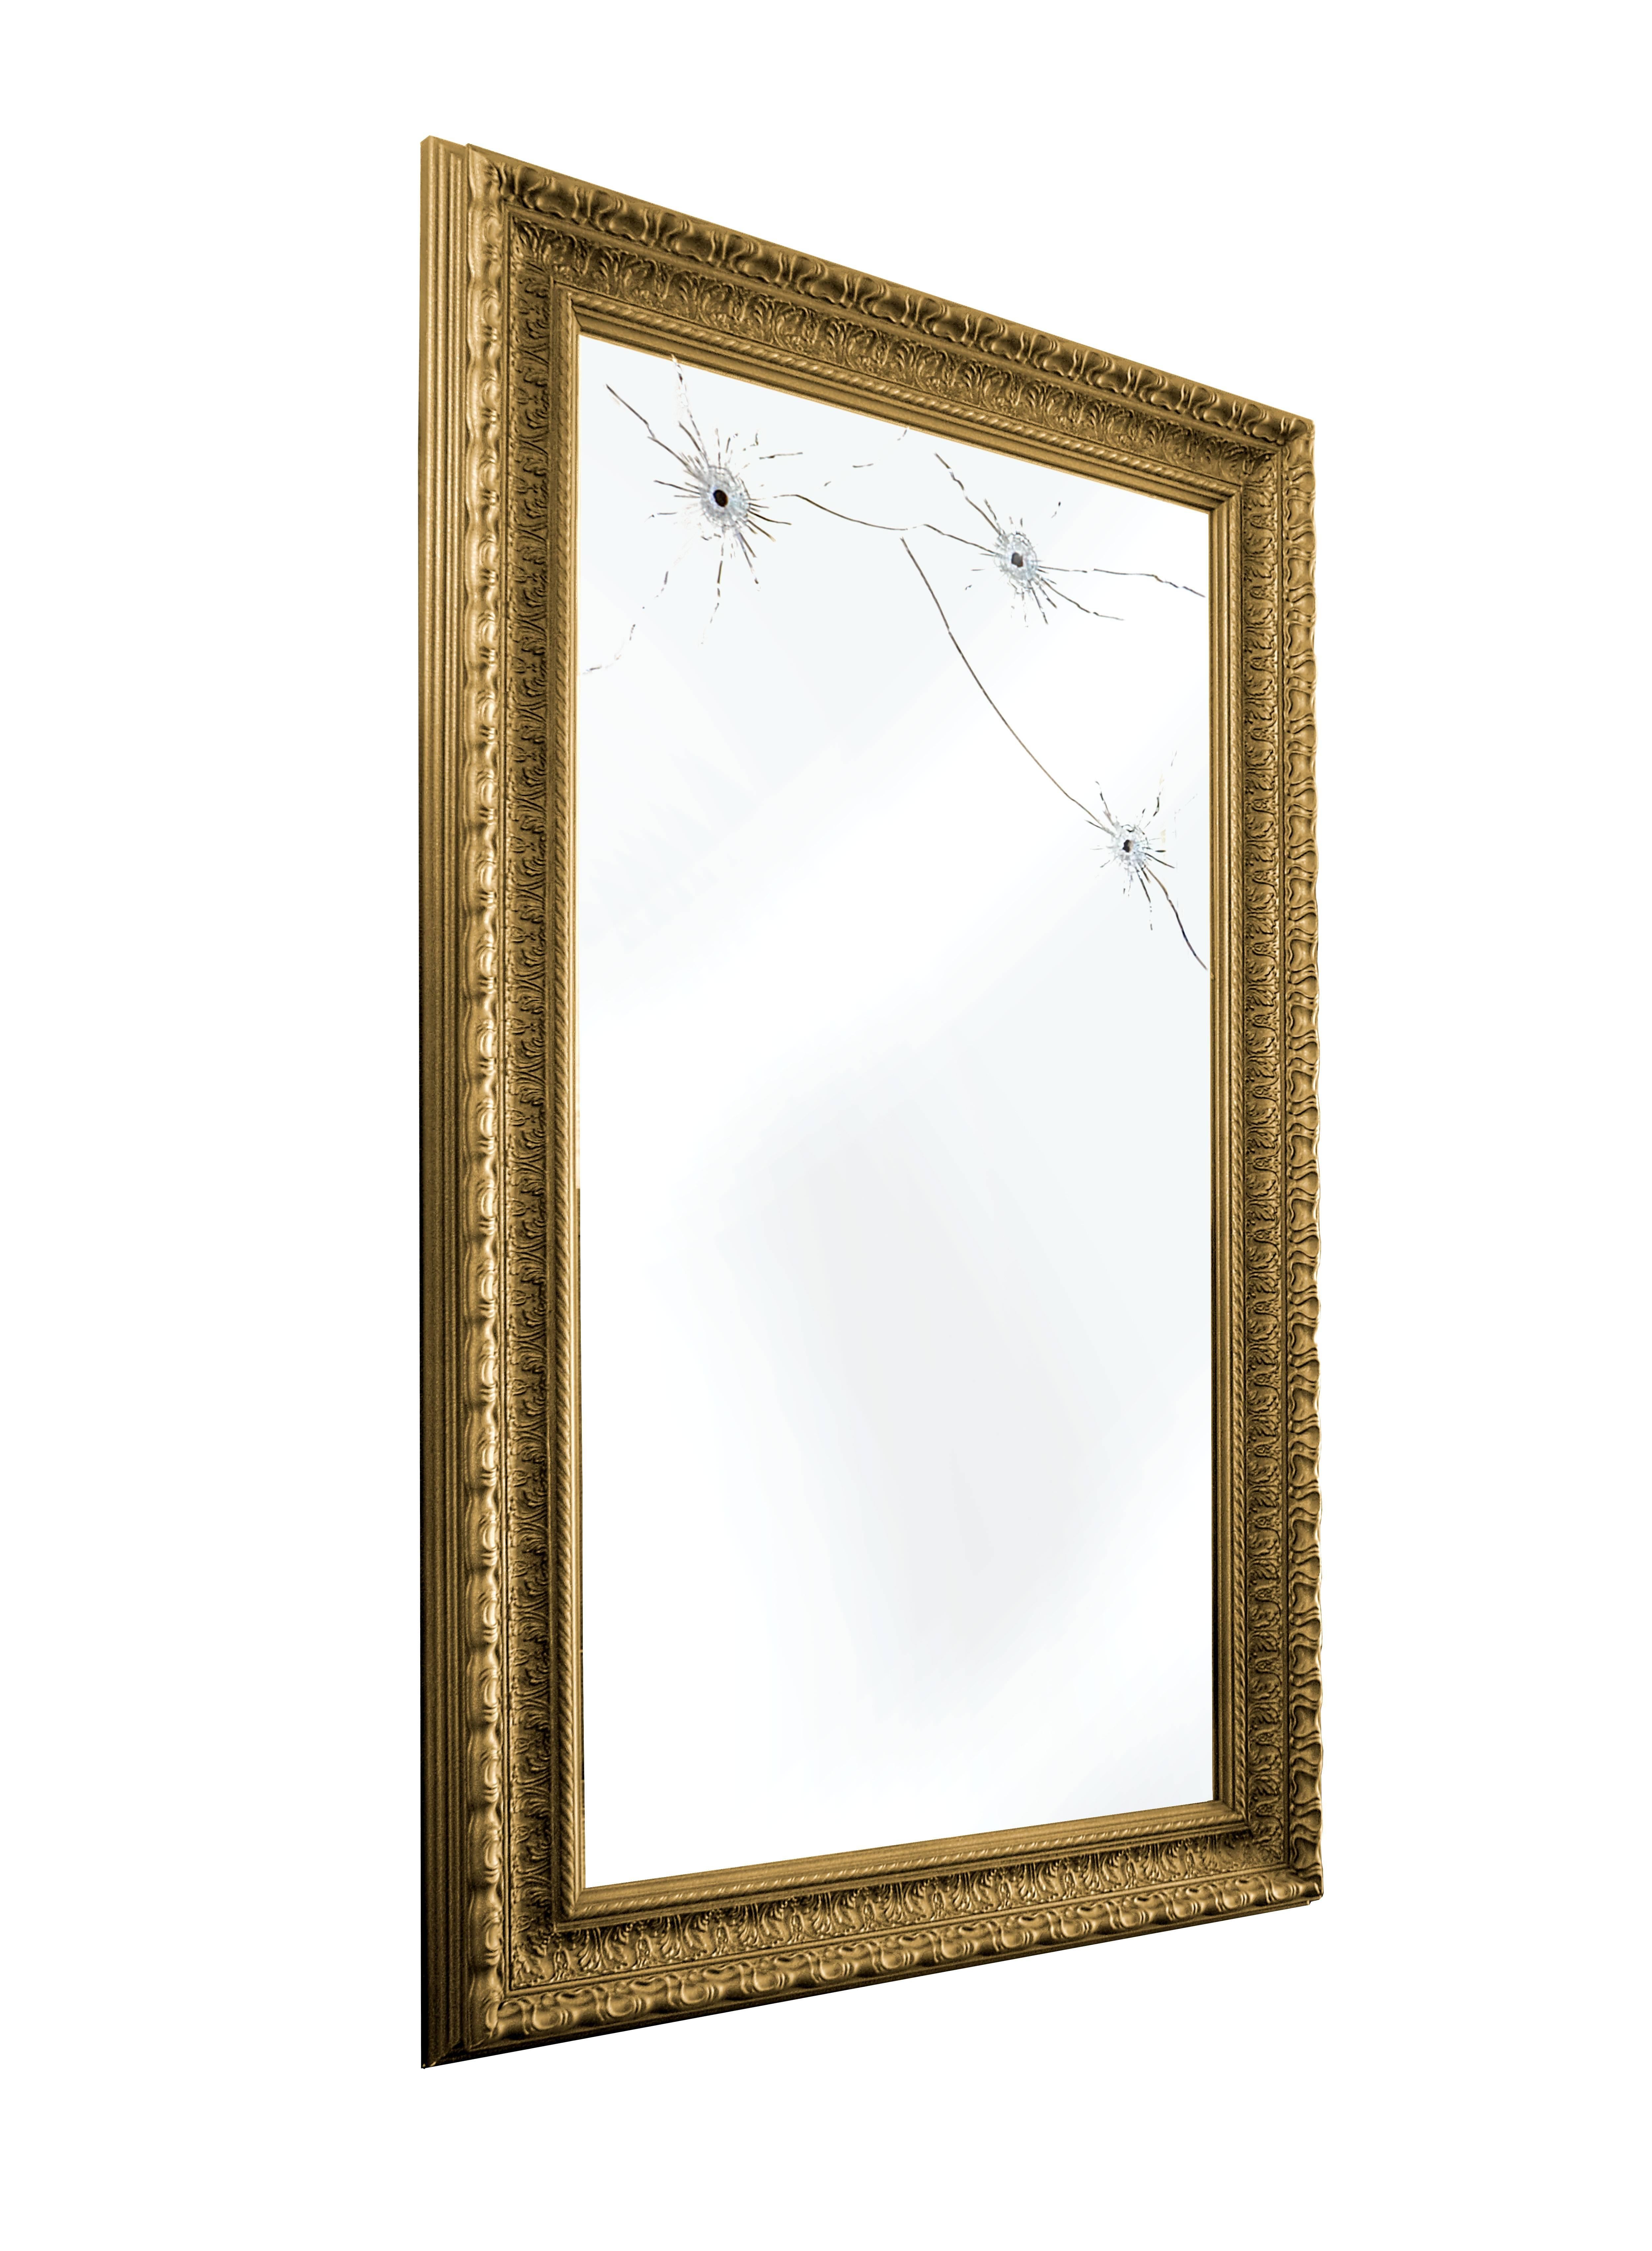 Contemporary Wall Floor Mirror Full-Length Black Classic Frame Rectangular Collectible Design For Sale